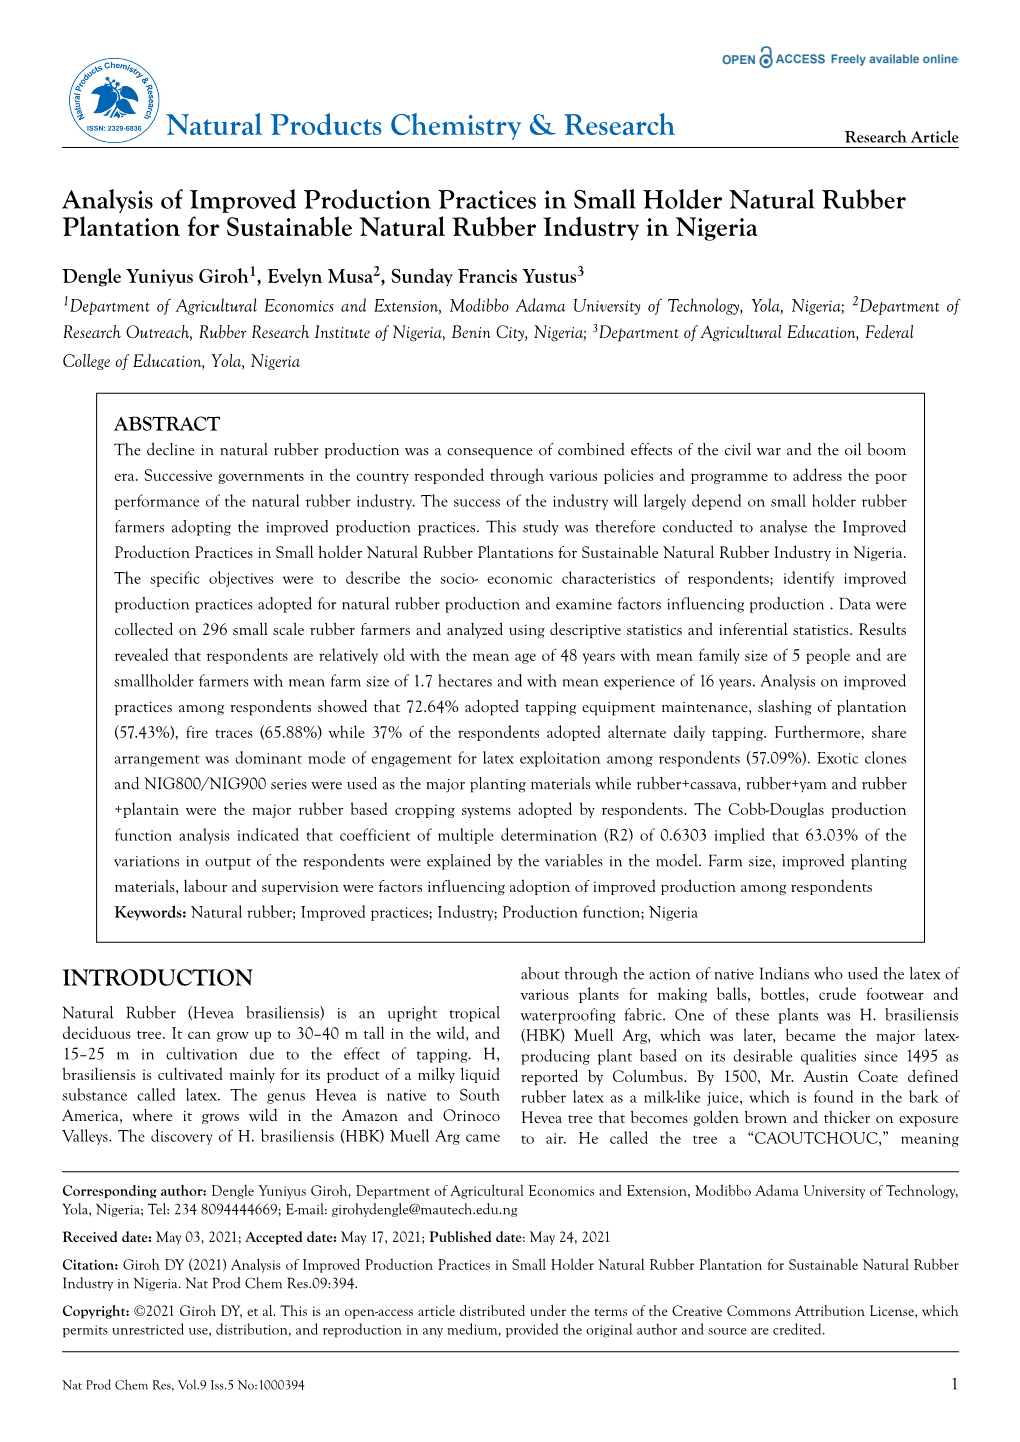 Analysis of Improved Production Practices in Small Holder Natural Rubber Plantation for Sustainable Natural Rubber Industry in Nigeria